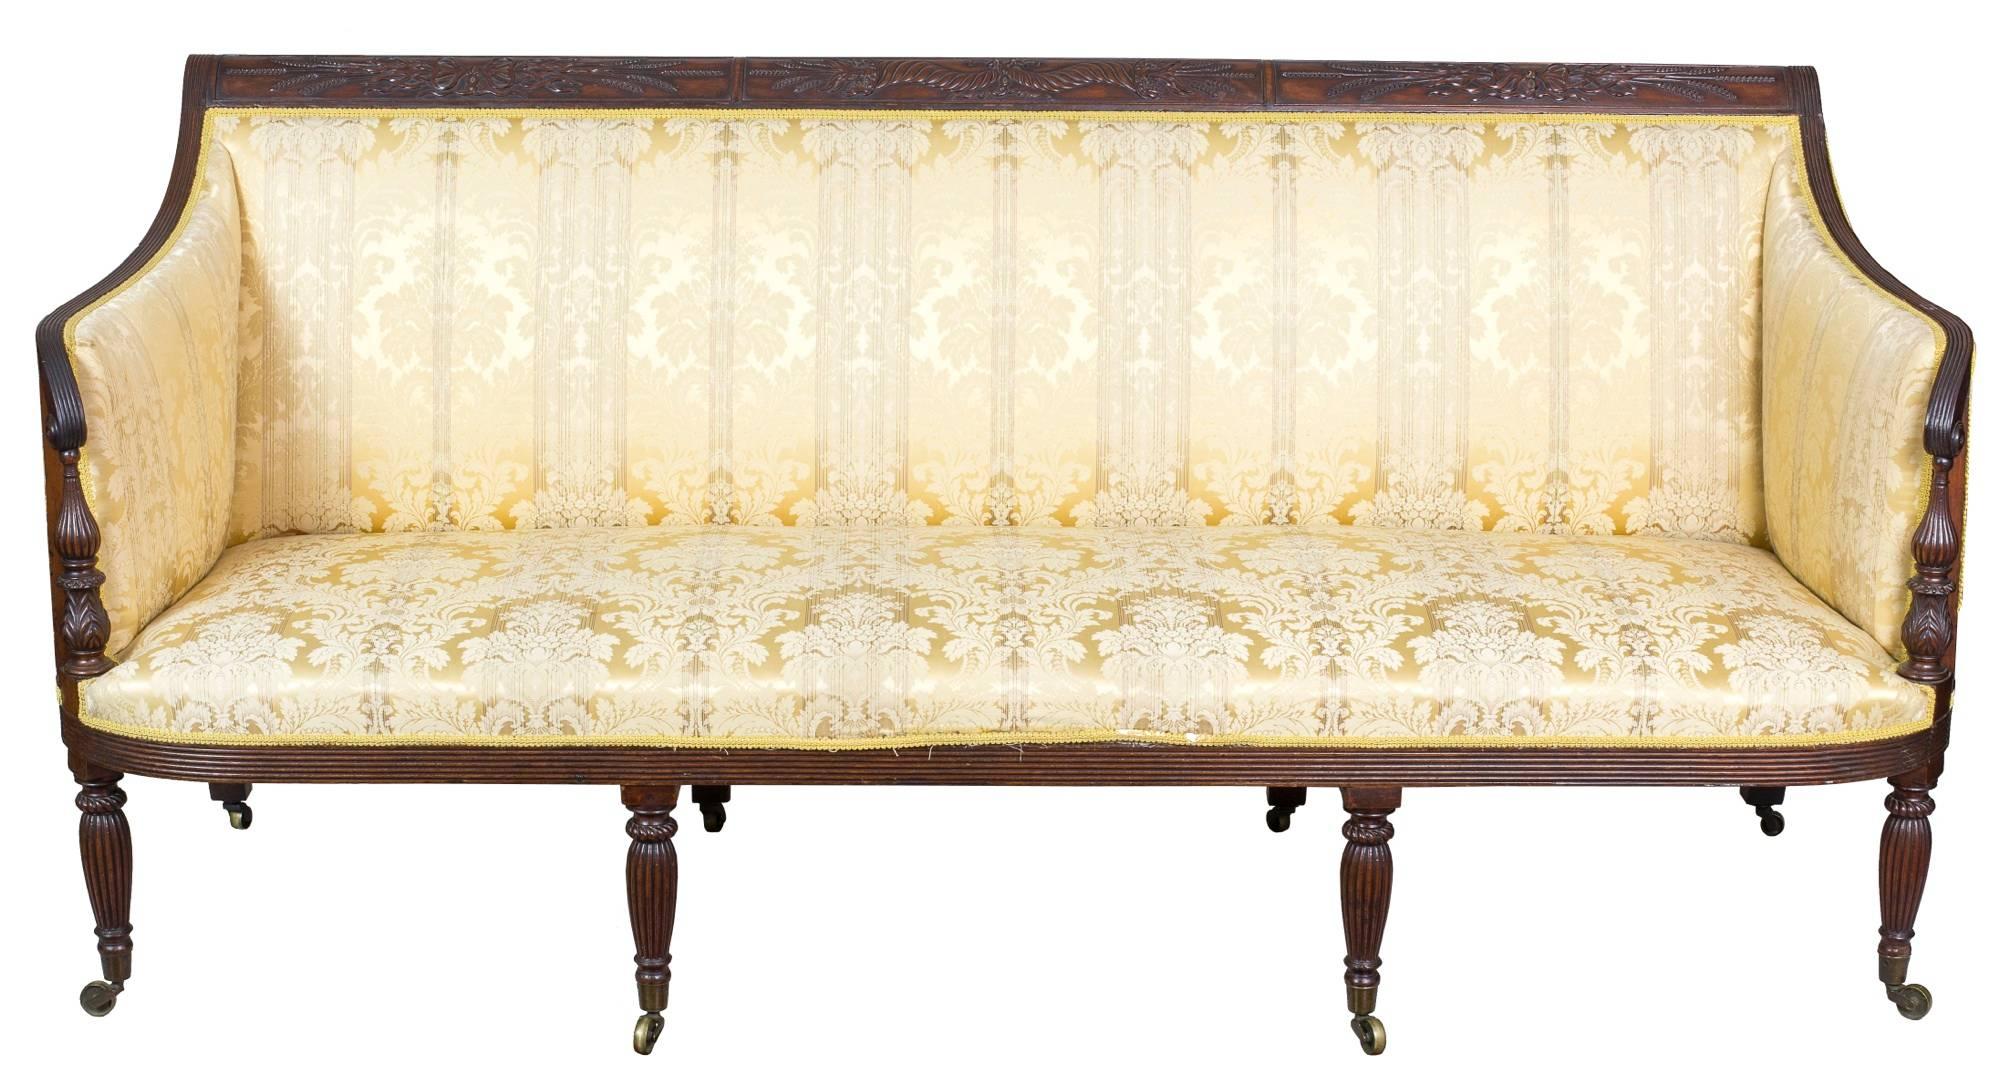 Mahogany Classical Sofa with Turned in Arms, Duncan Phyfe, New York, circa 1810 In Excellent Condition For Sale In Providence, RI